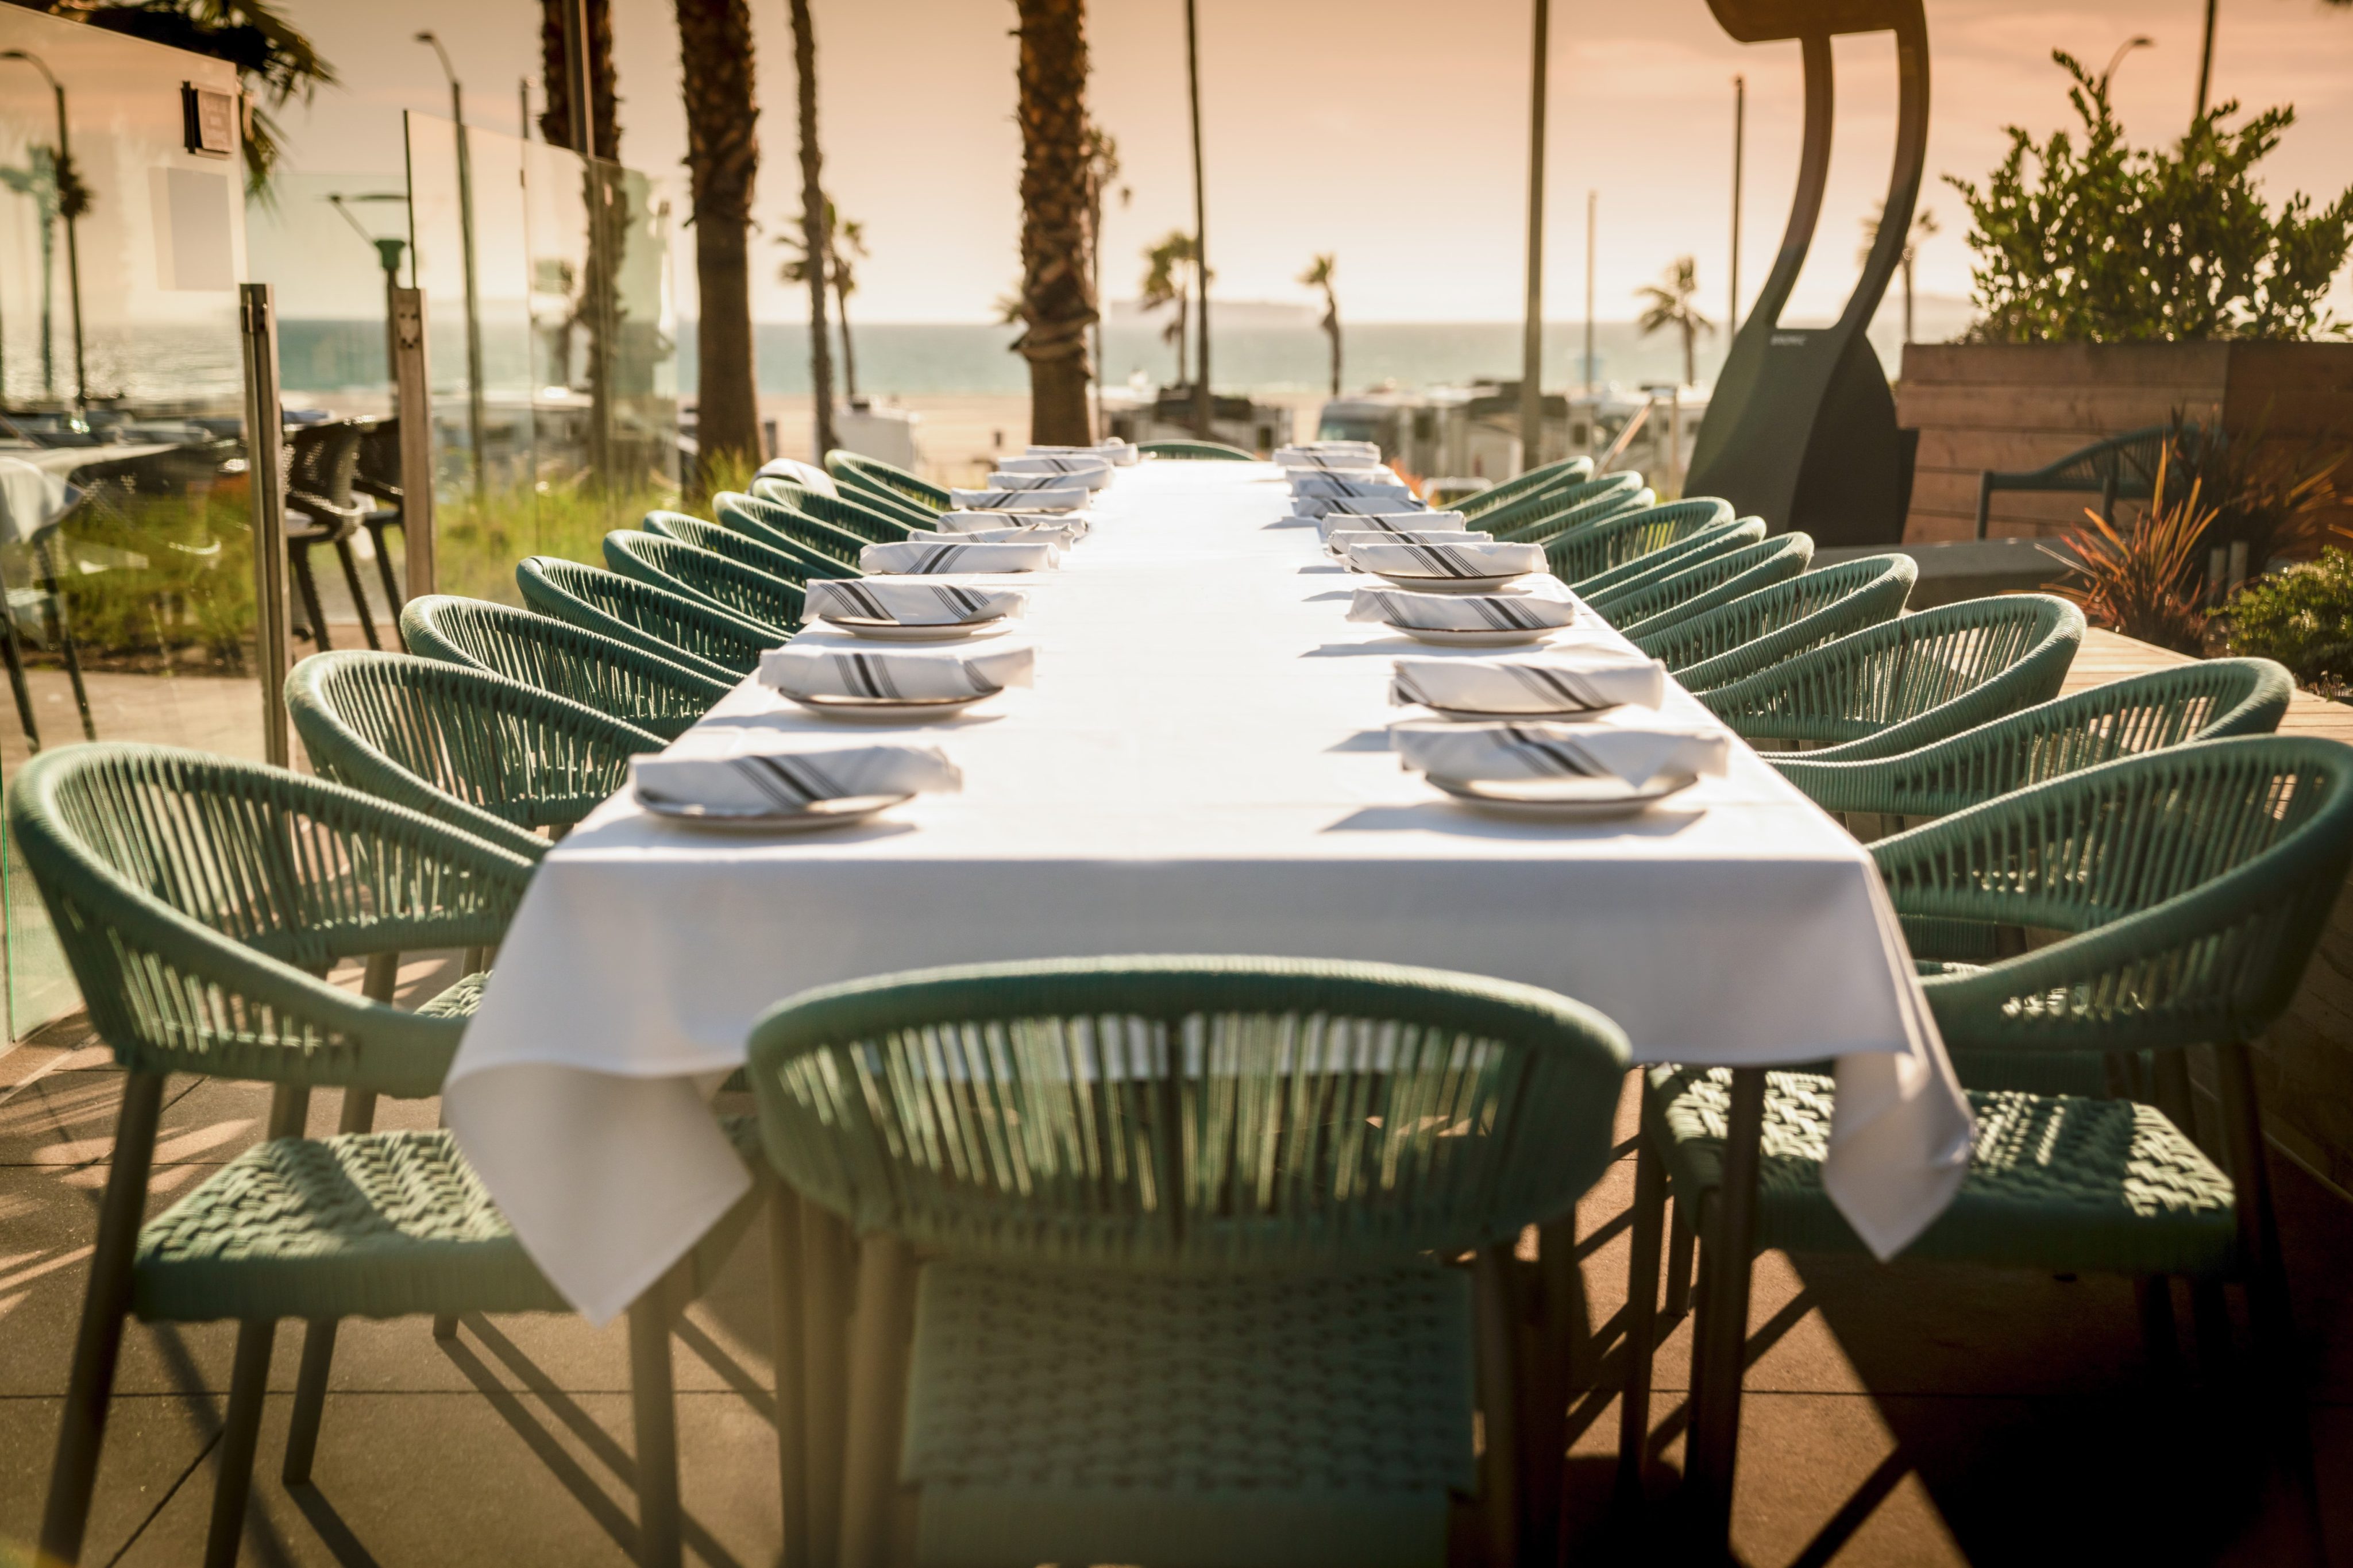 A long dining table set for a meal, with green chairs, plates, and napkins, located on an open-air patio with the ocean and palm trees in the background.